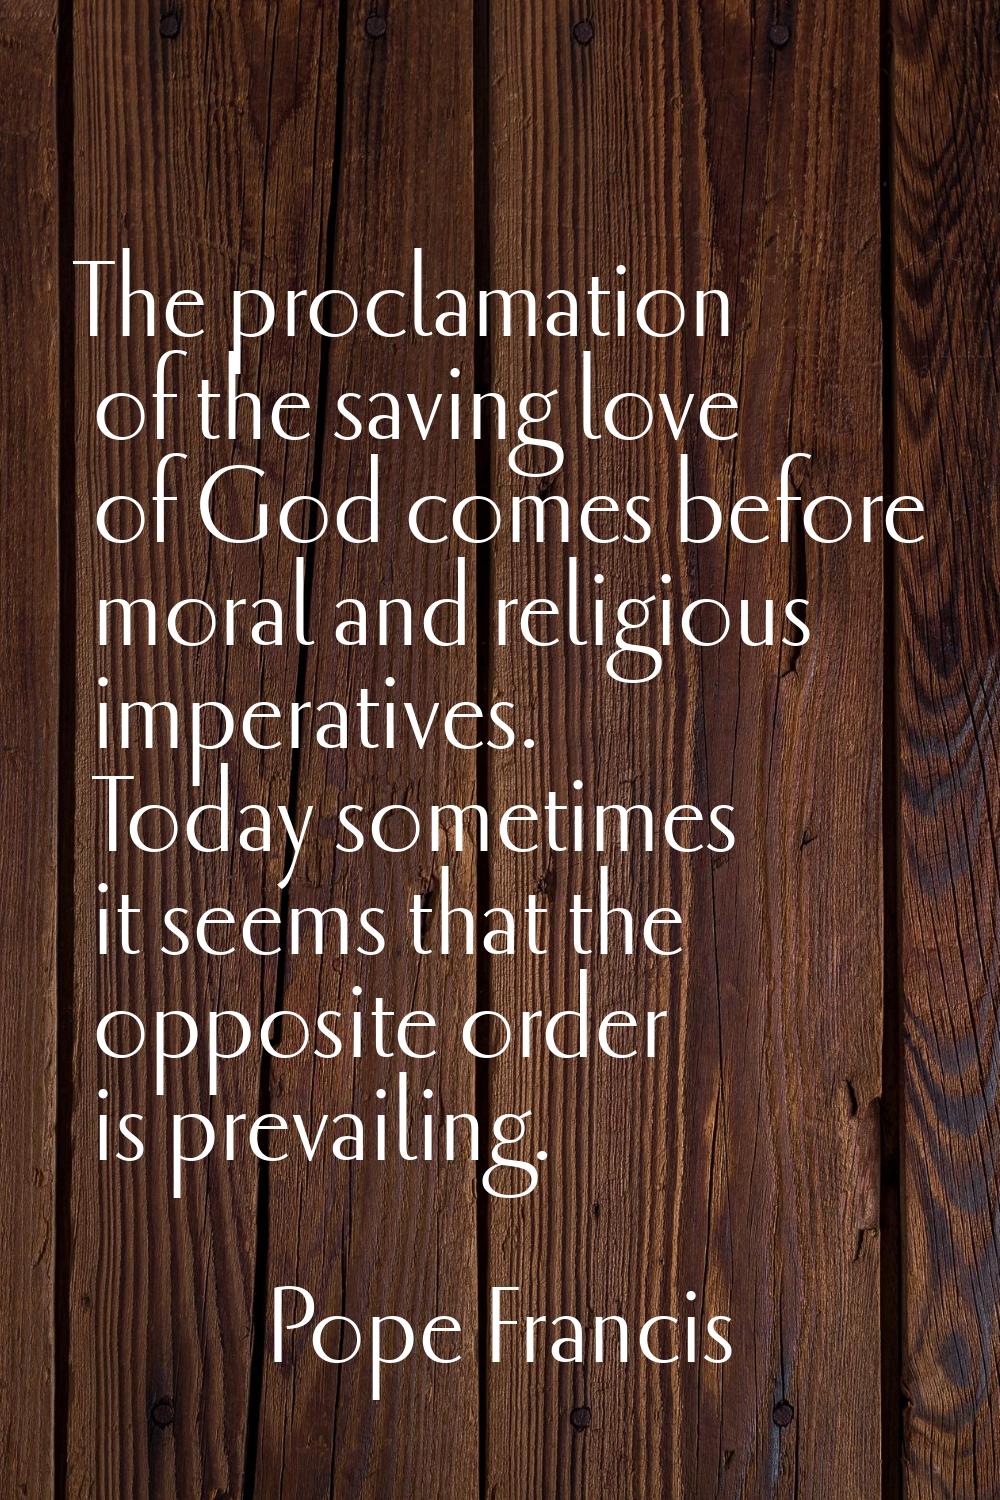 The proclamation of the saving love of God comes before moral and religious imperatives. Today some